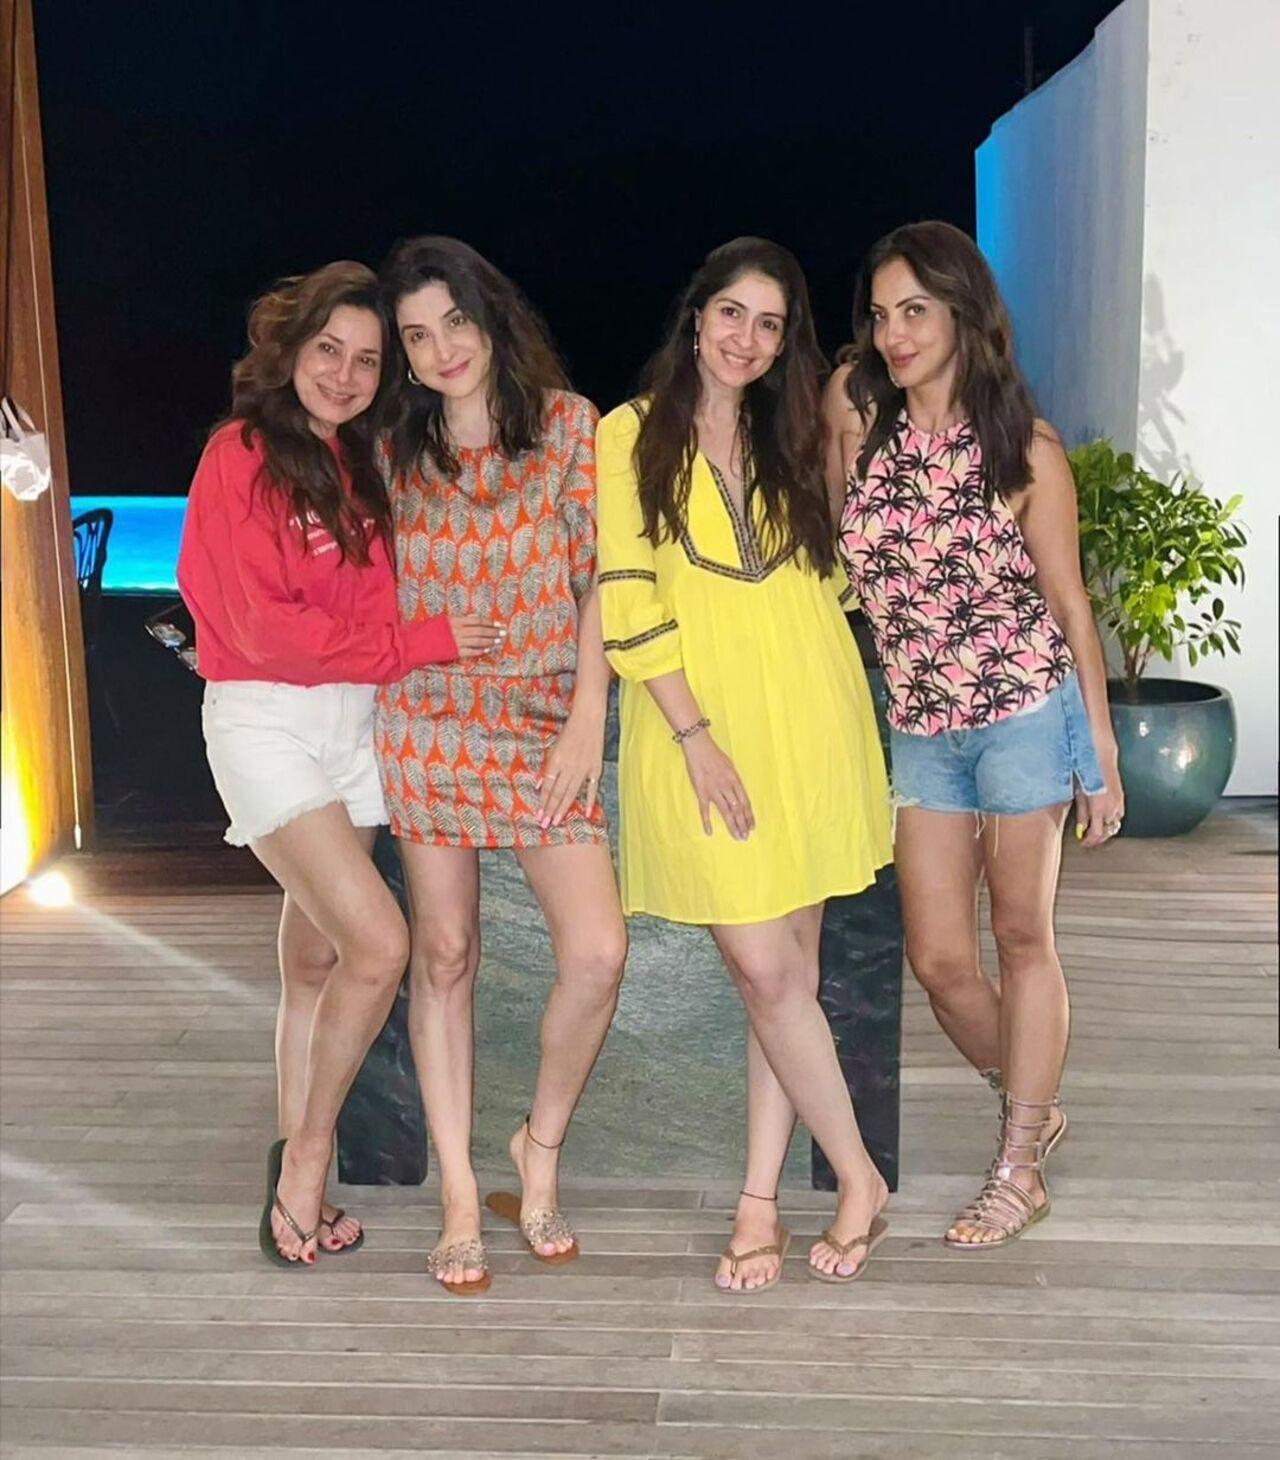 The first season of Fabulous Lives of Bollywood Wives saw the wives take a trip to Dubai and let loose. They shop, they fight, they party and share some insights about the industry